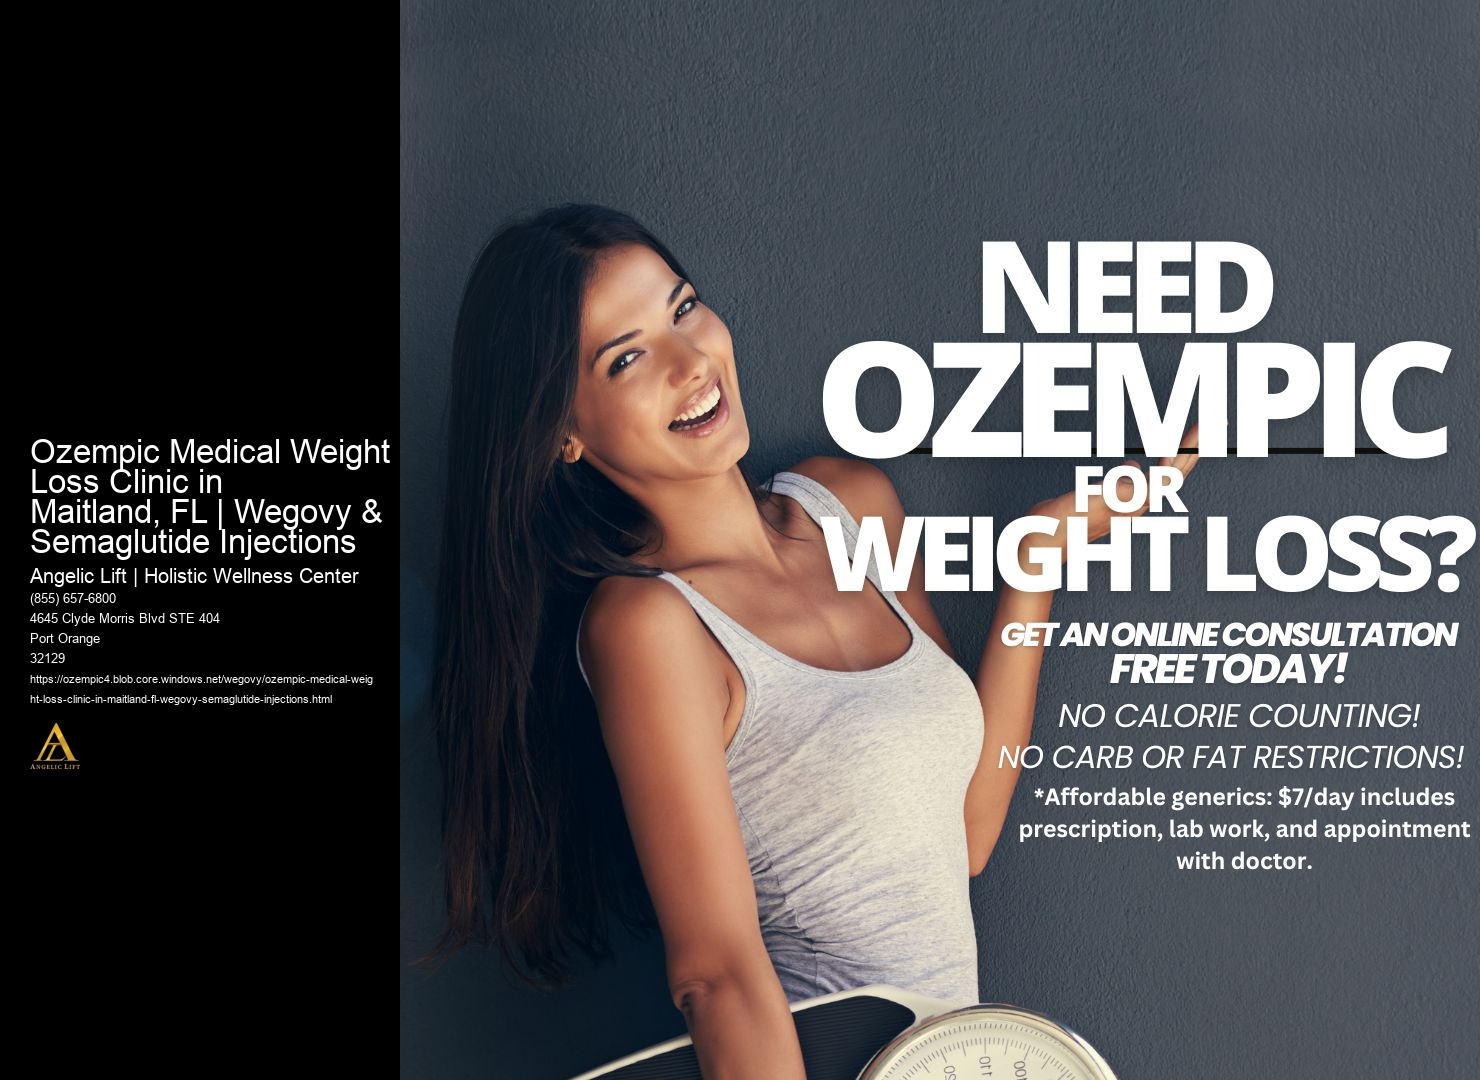 Ozempic Medical Weight Loss Clinic in Maitland, FL | Wegovy & Semaglutide Injections